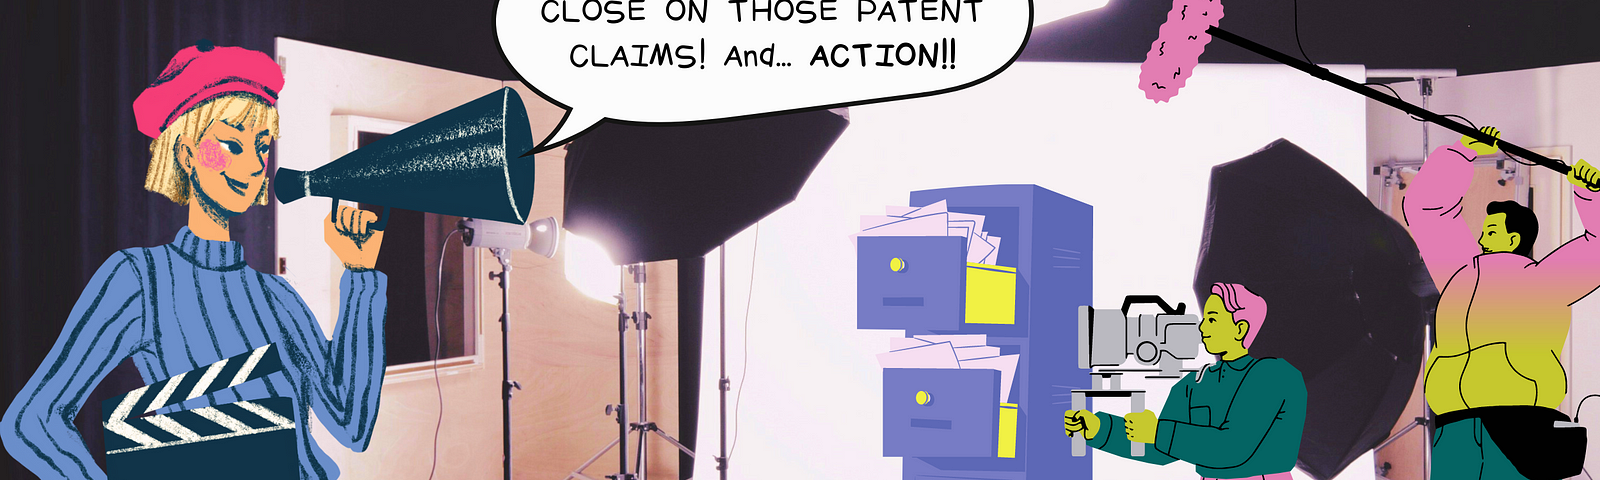 A film director on set tells her crew to “Pull in nice and close on those patent claims! And… action!!!” The crew is filming a tall filing cabinet stuffed with patents.